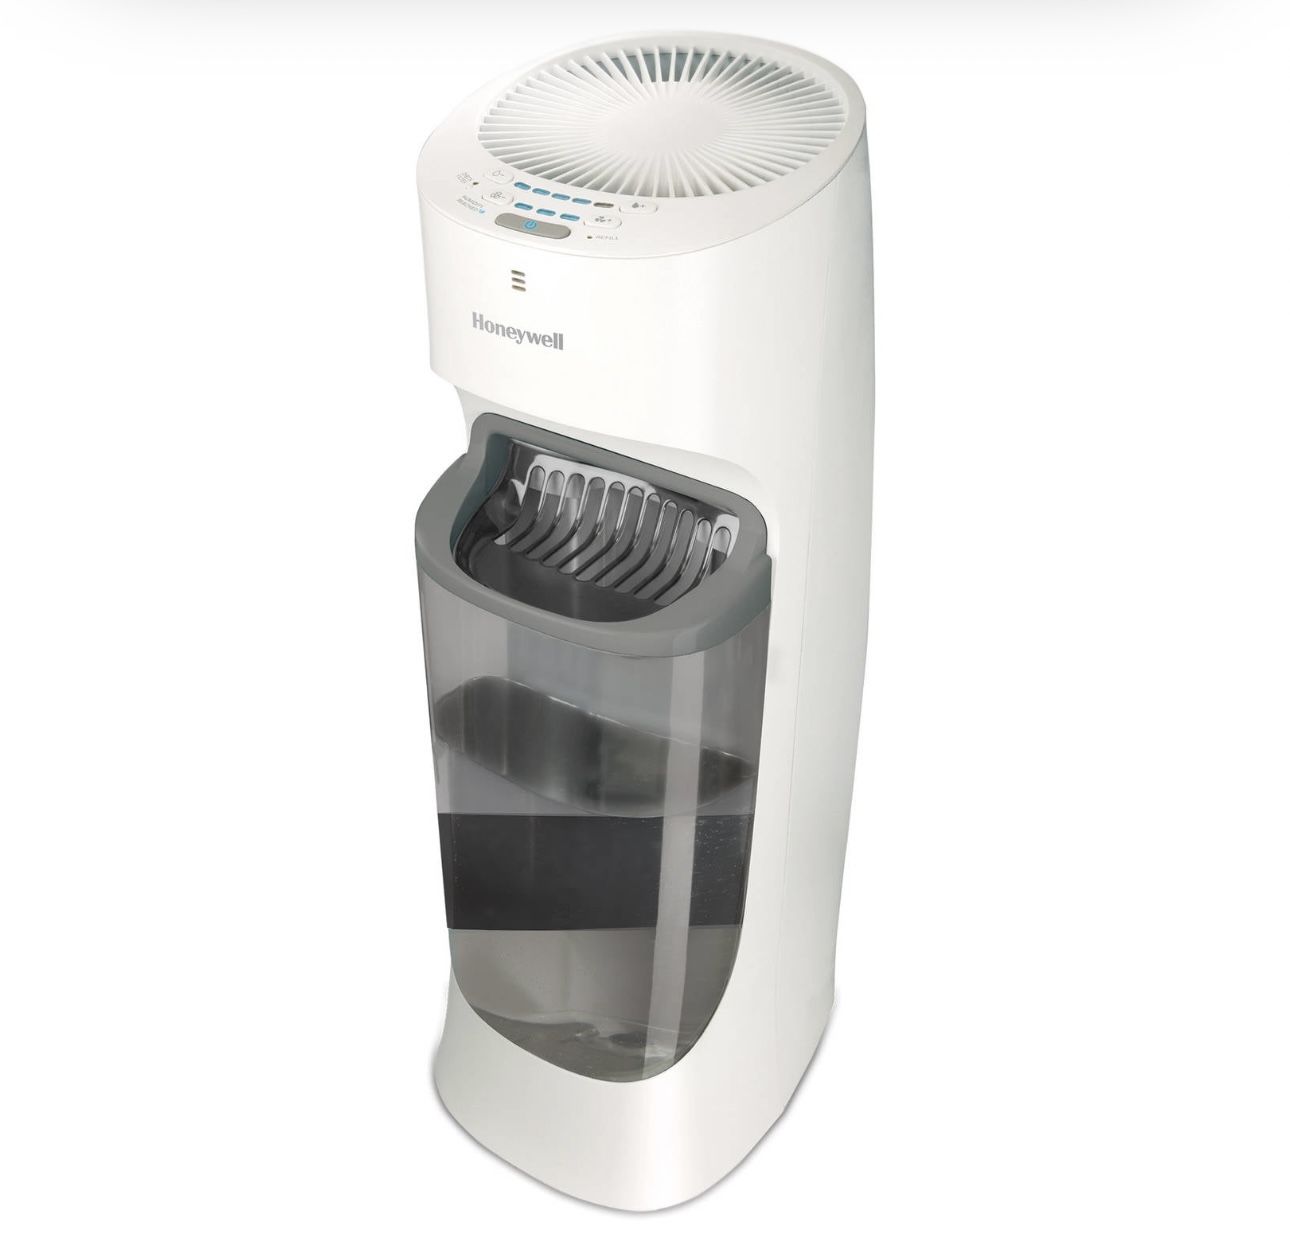 Honeywell HEV615 Cool Moisture Humidifier with Humidistat, White, HEV615W